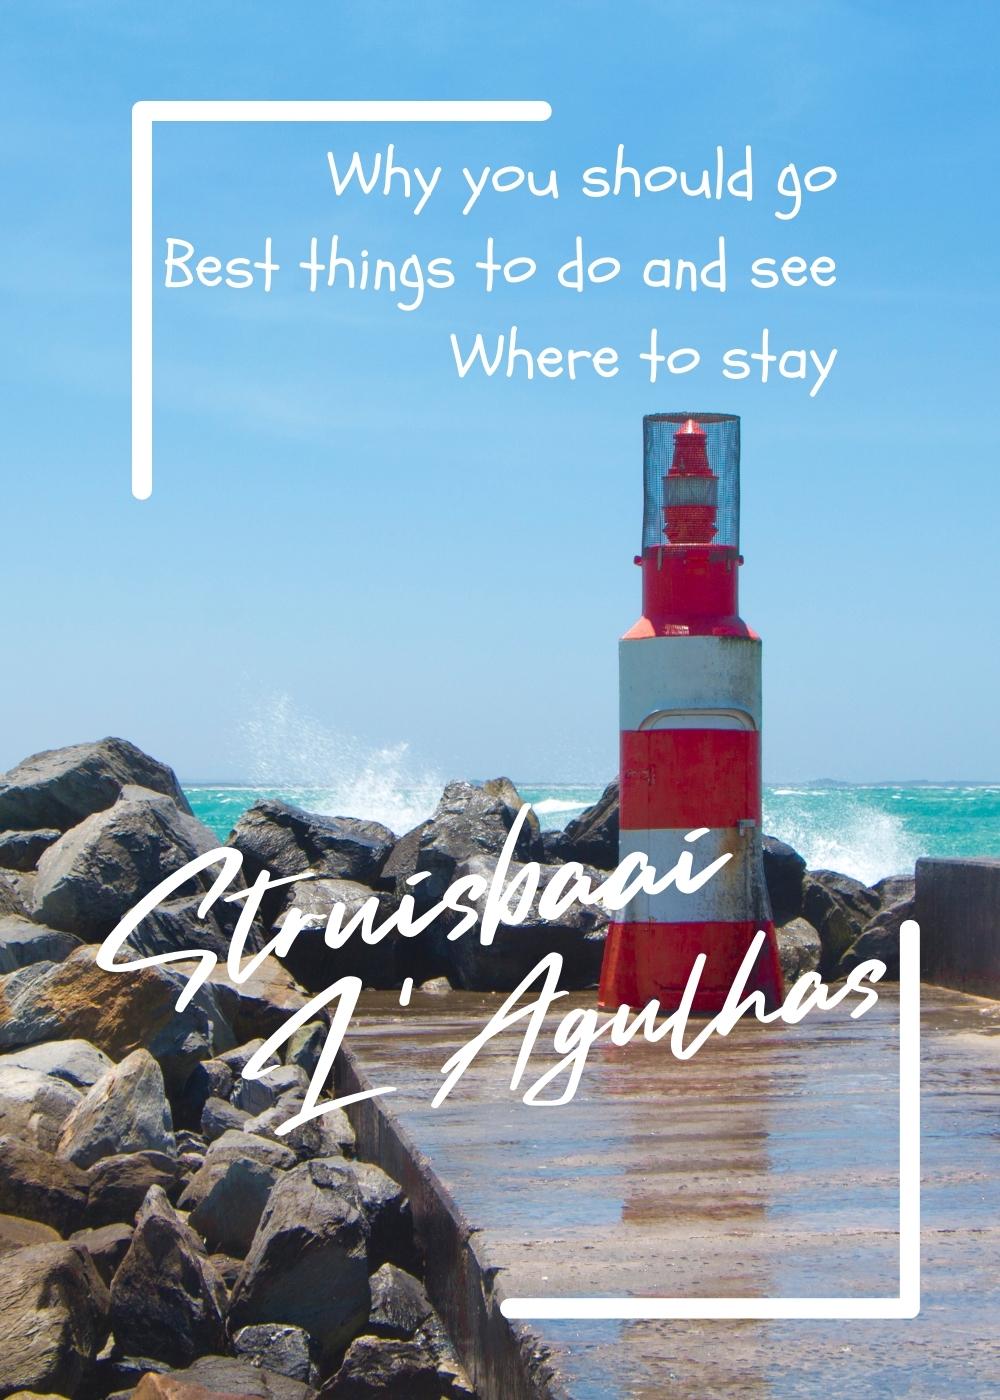 Struisbaai Agulhas Why you should go Best places to stay Things to do